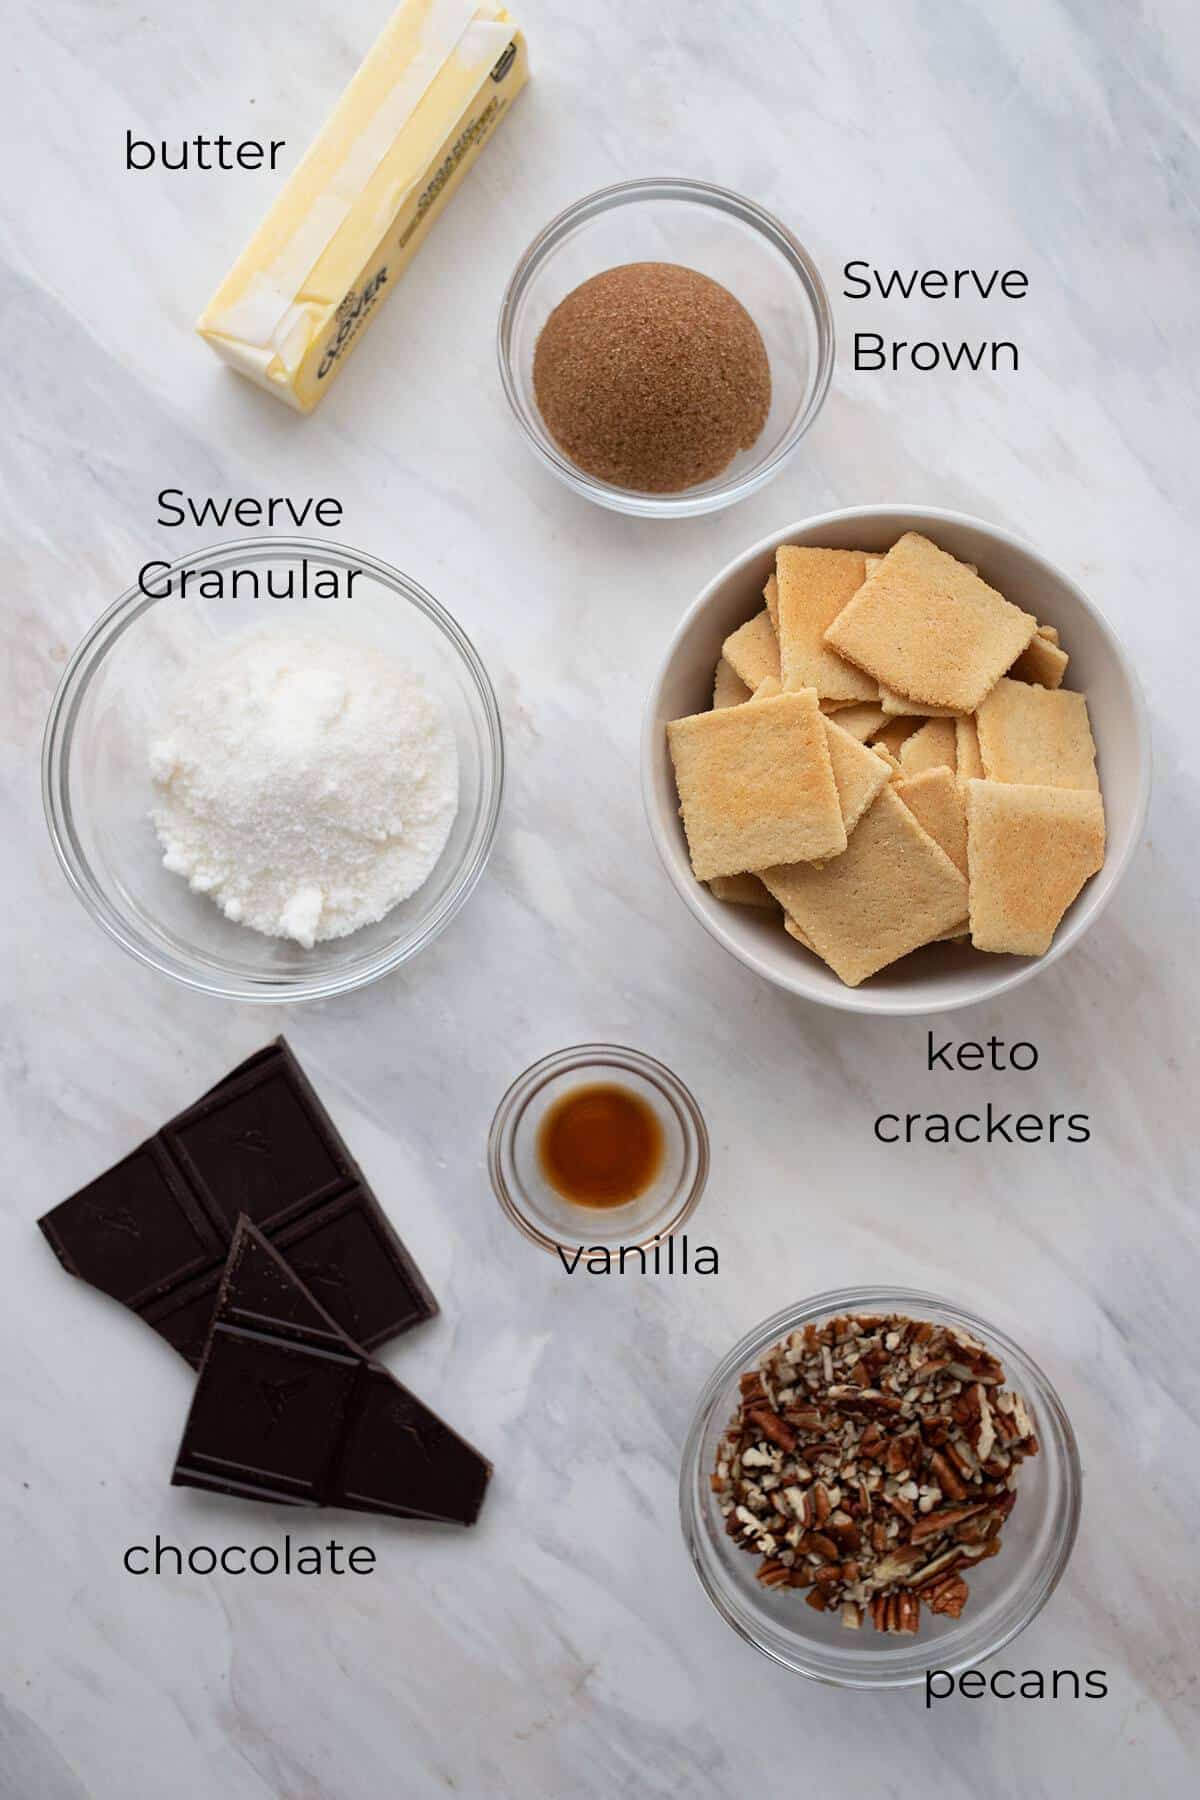 Top down image of ingredients needed for keto toffee.